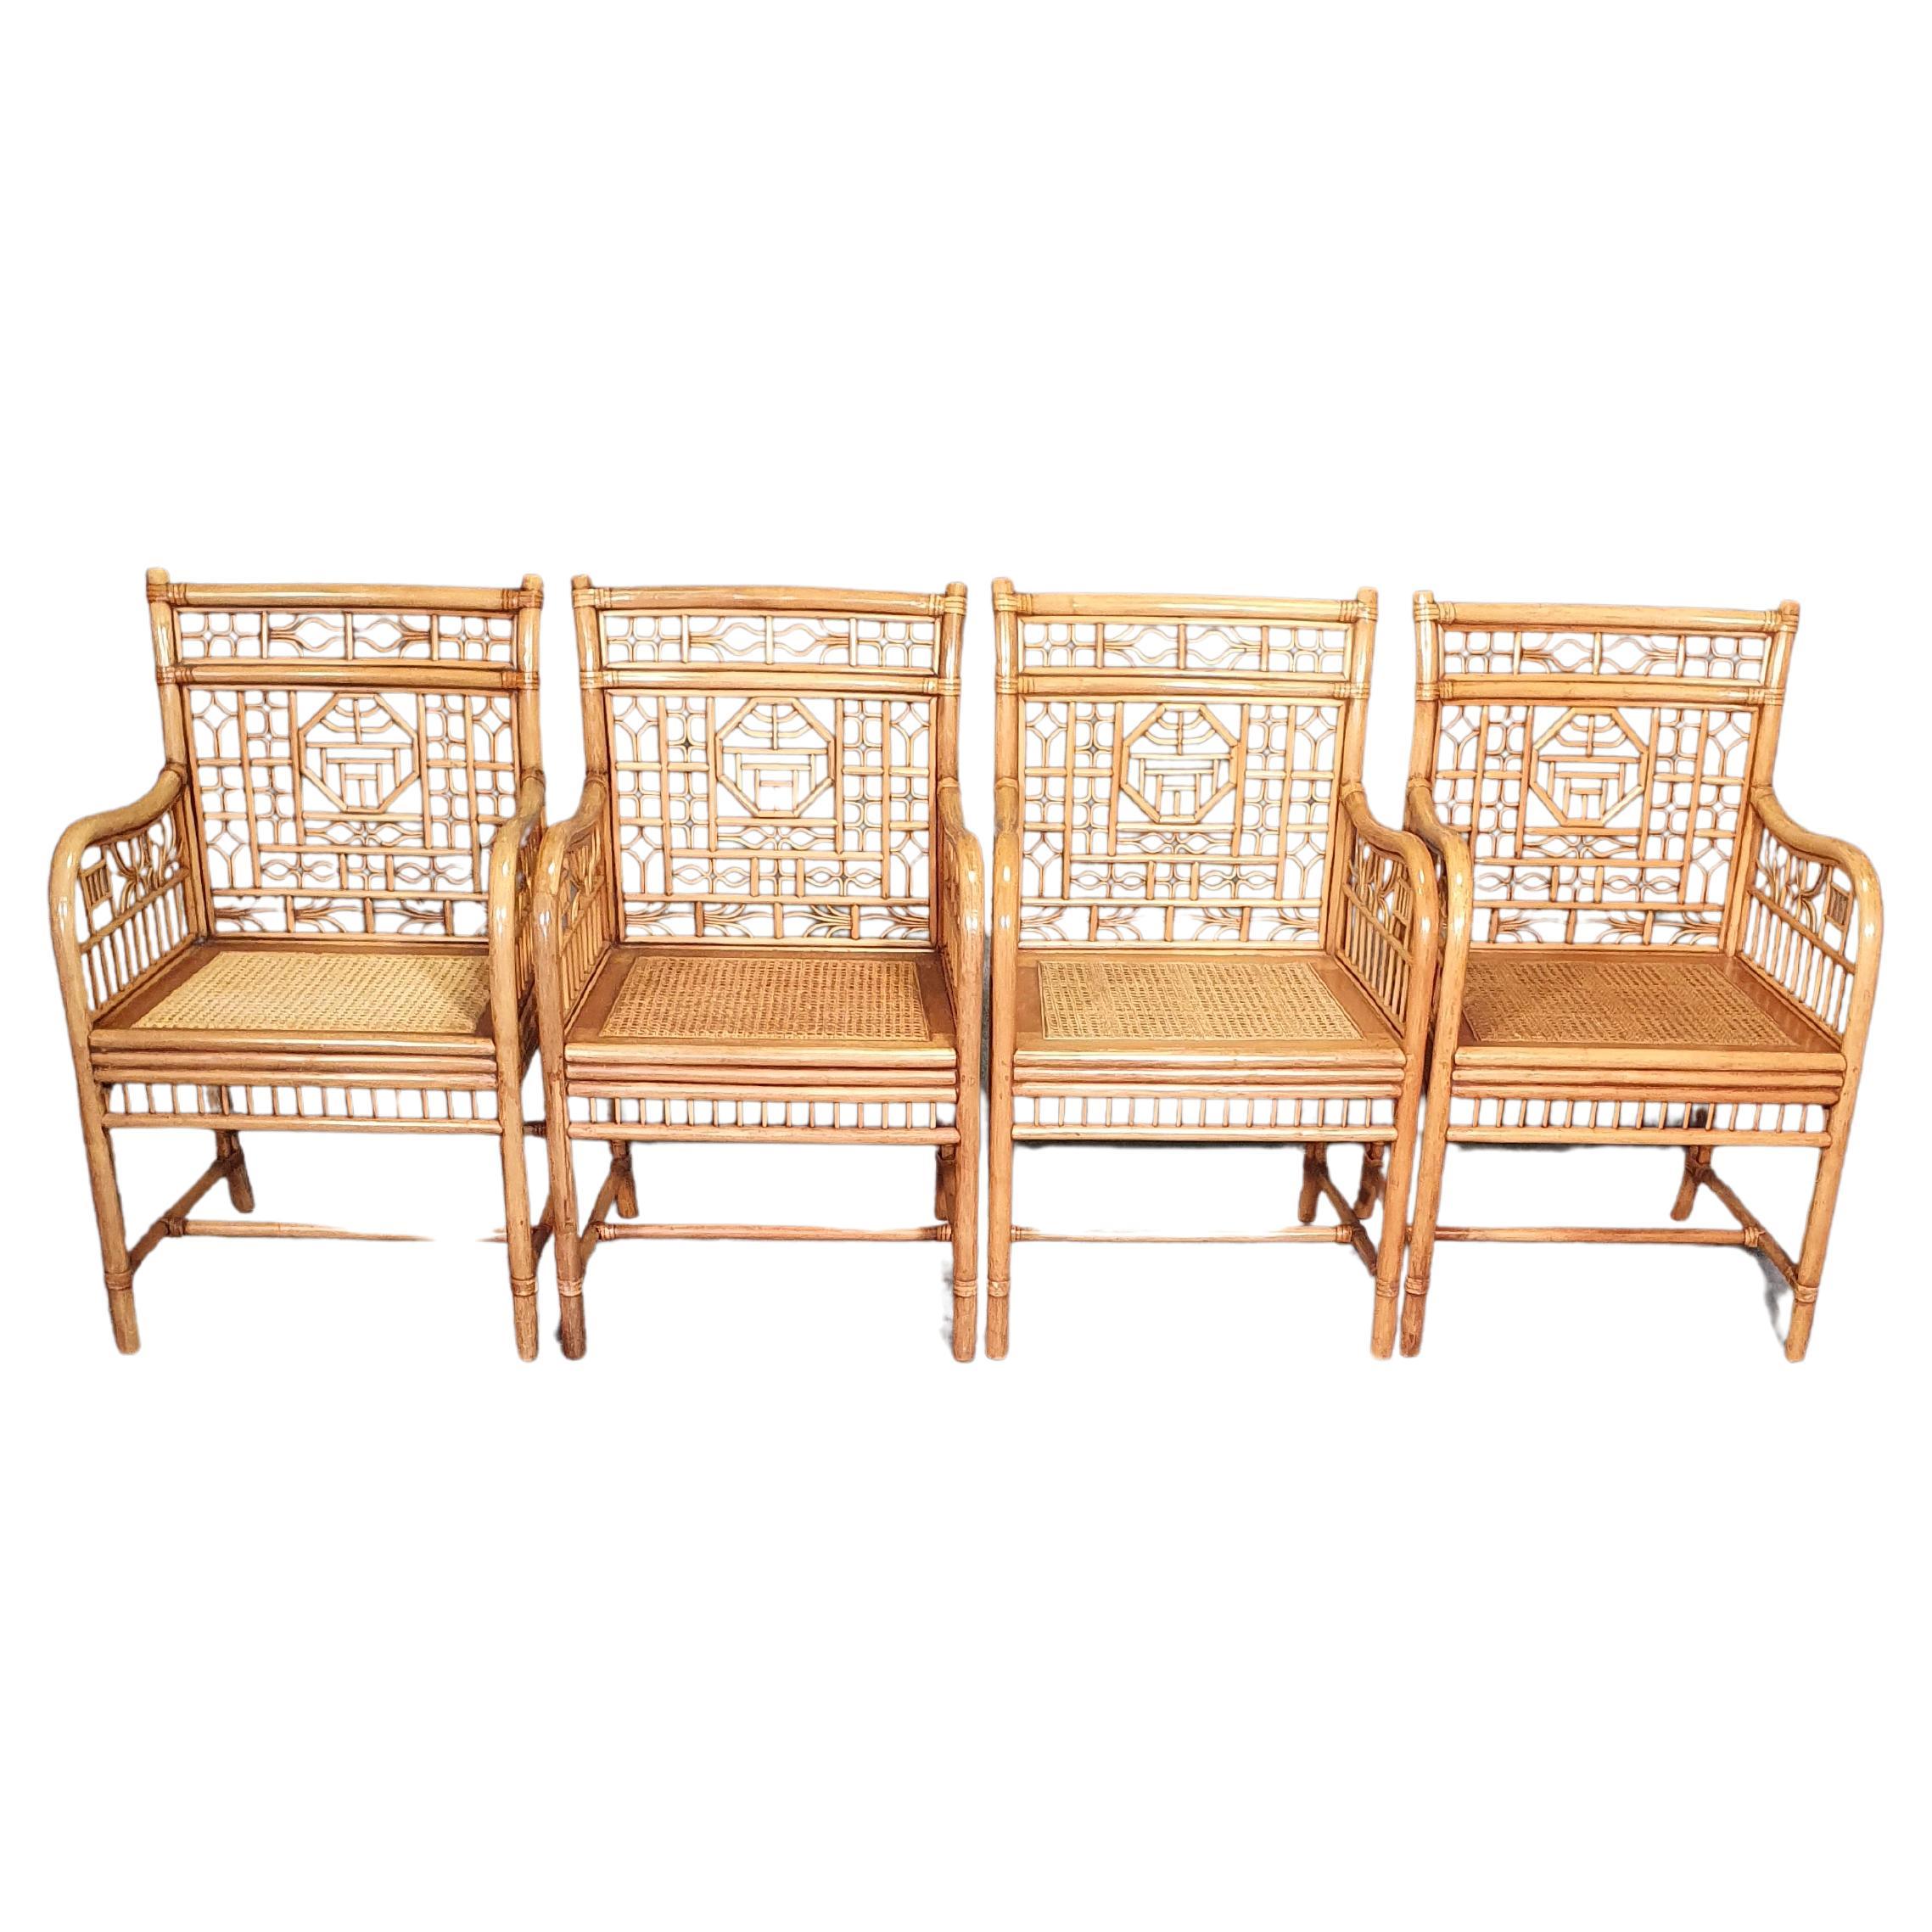 4 x Mcguire rattan chair marked Chinois / Chinoiserie Chique bamboo